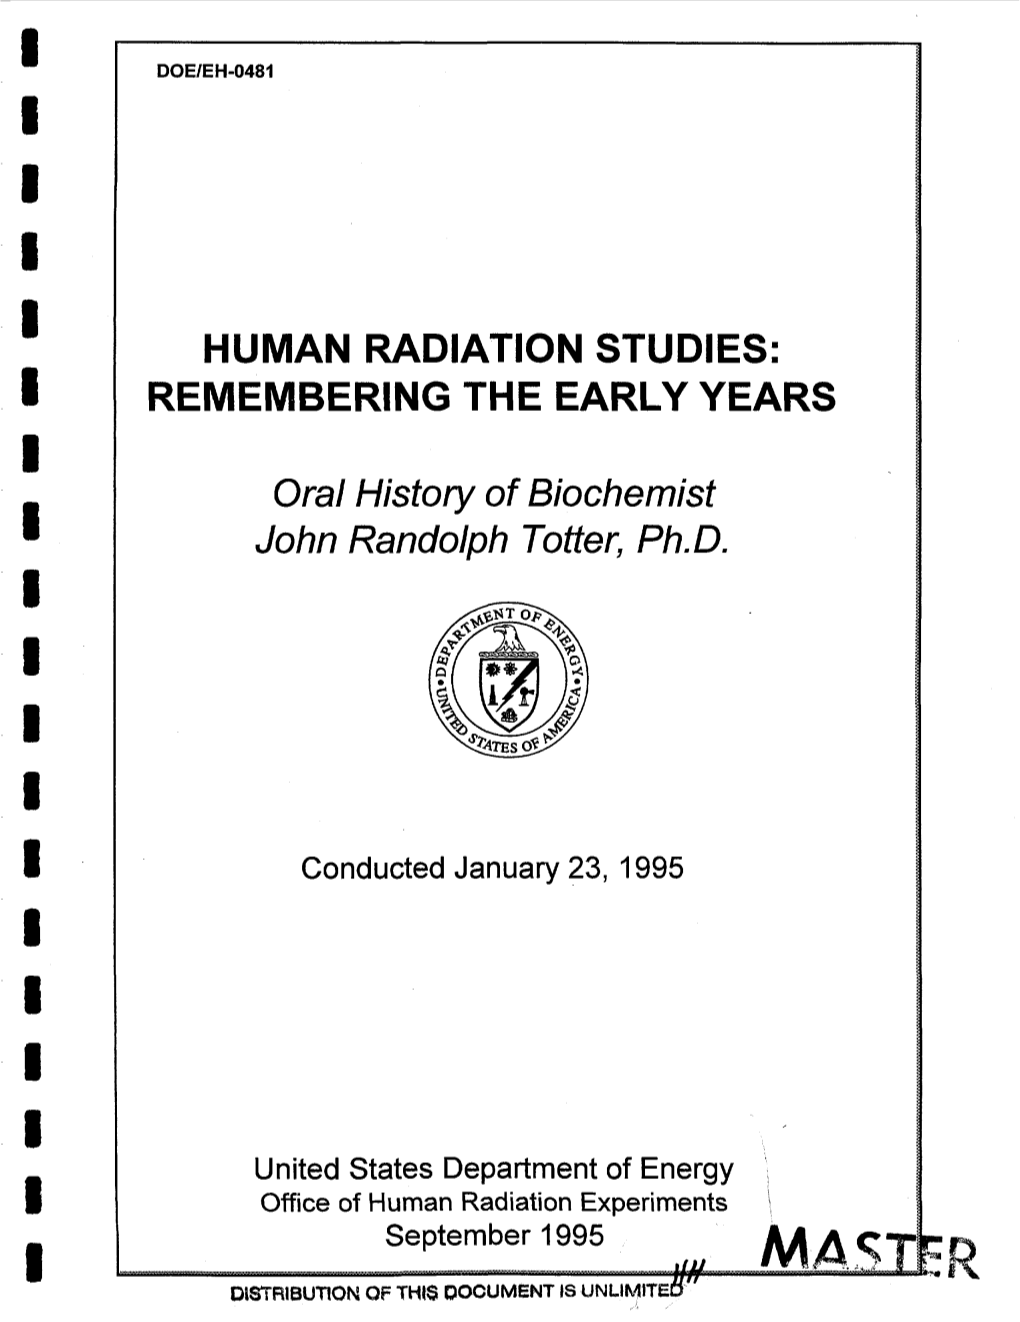 Human Radiation Studies: Remembering the Early Years